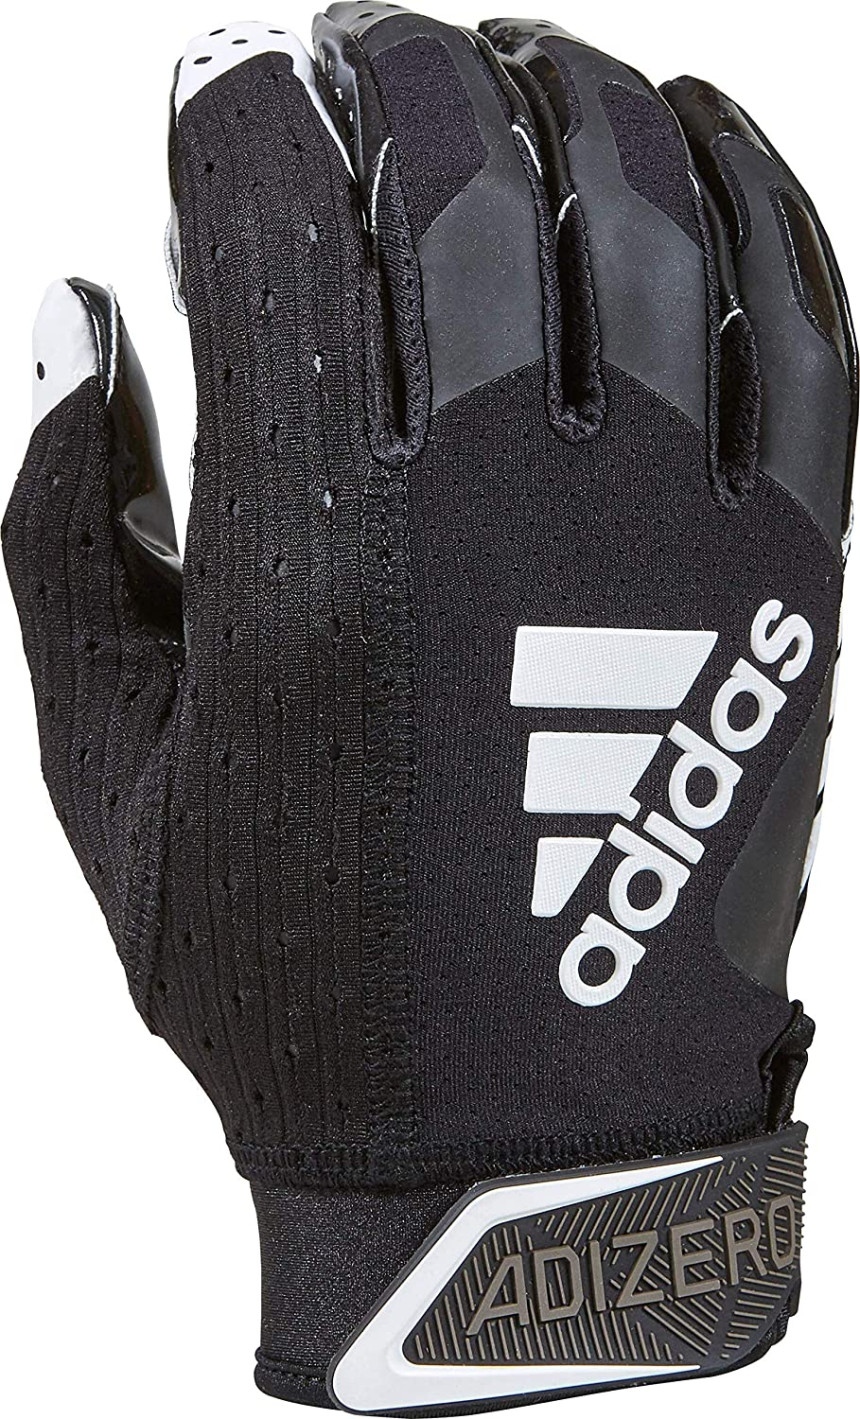 Nike Vapor Jet Football Gloves: Unmatched Grip and Performance